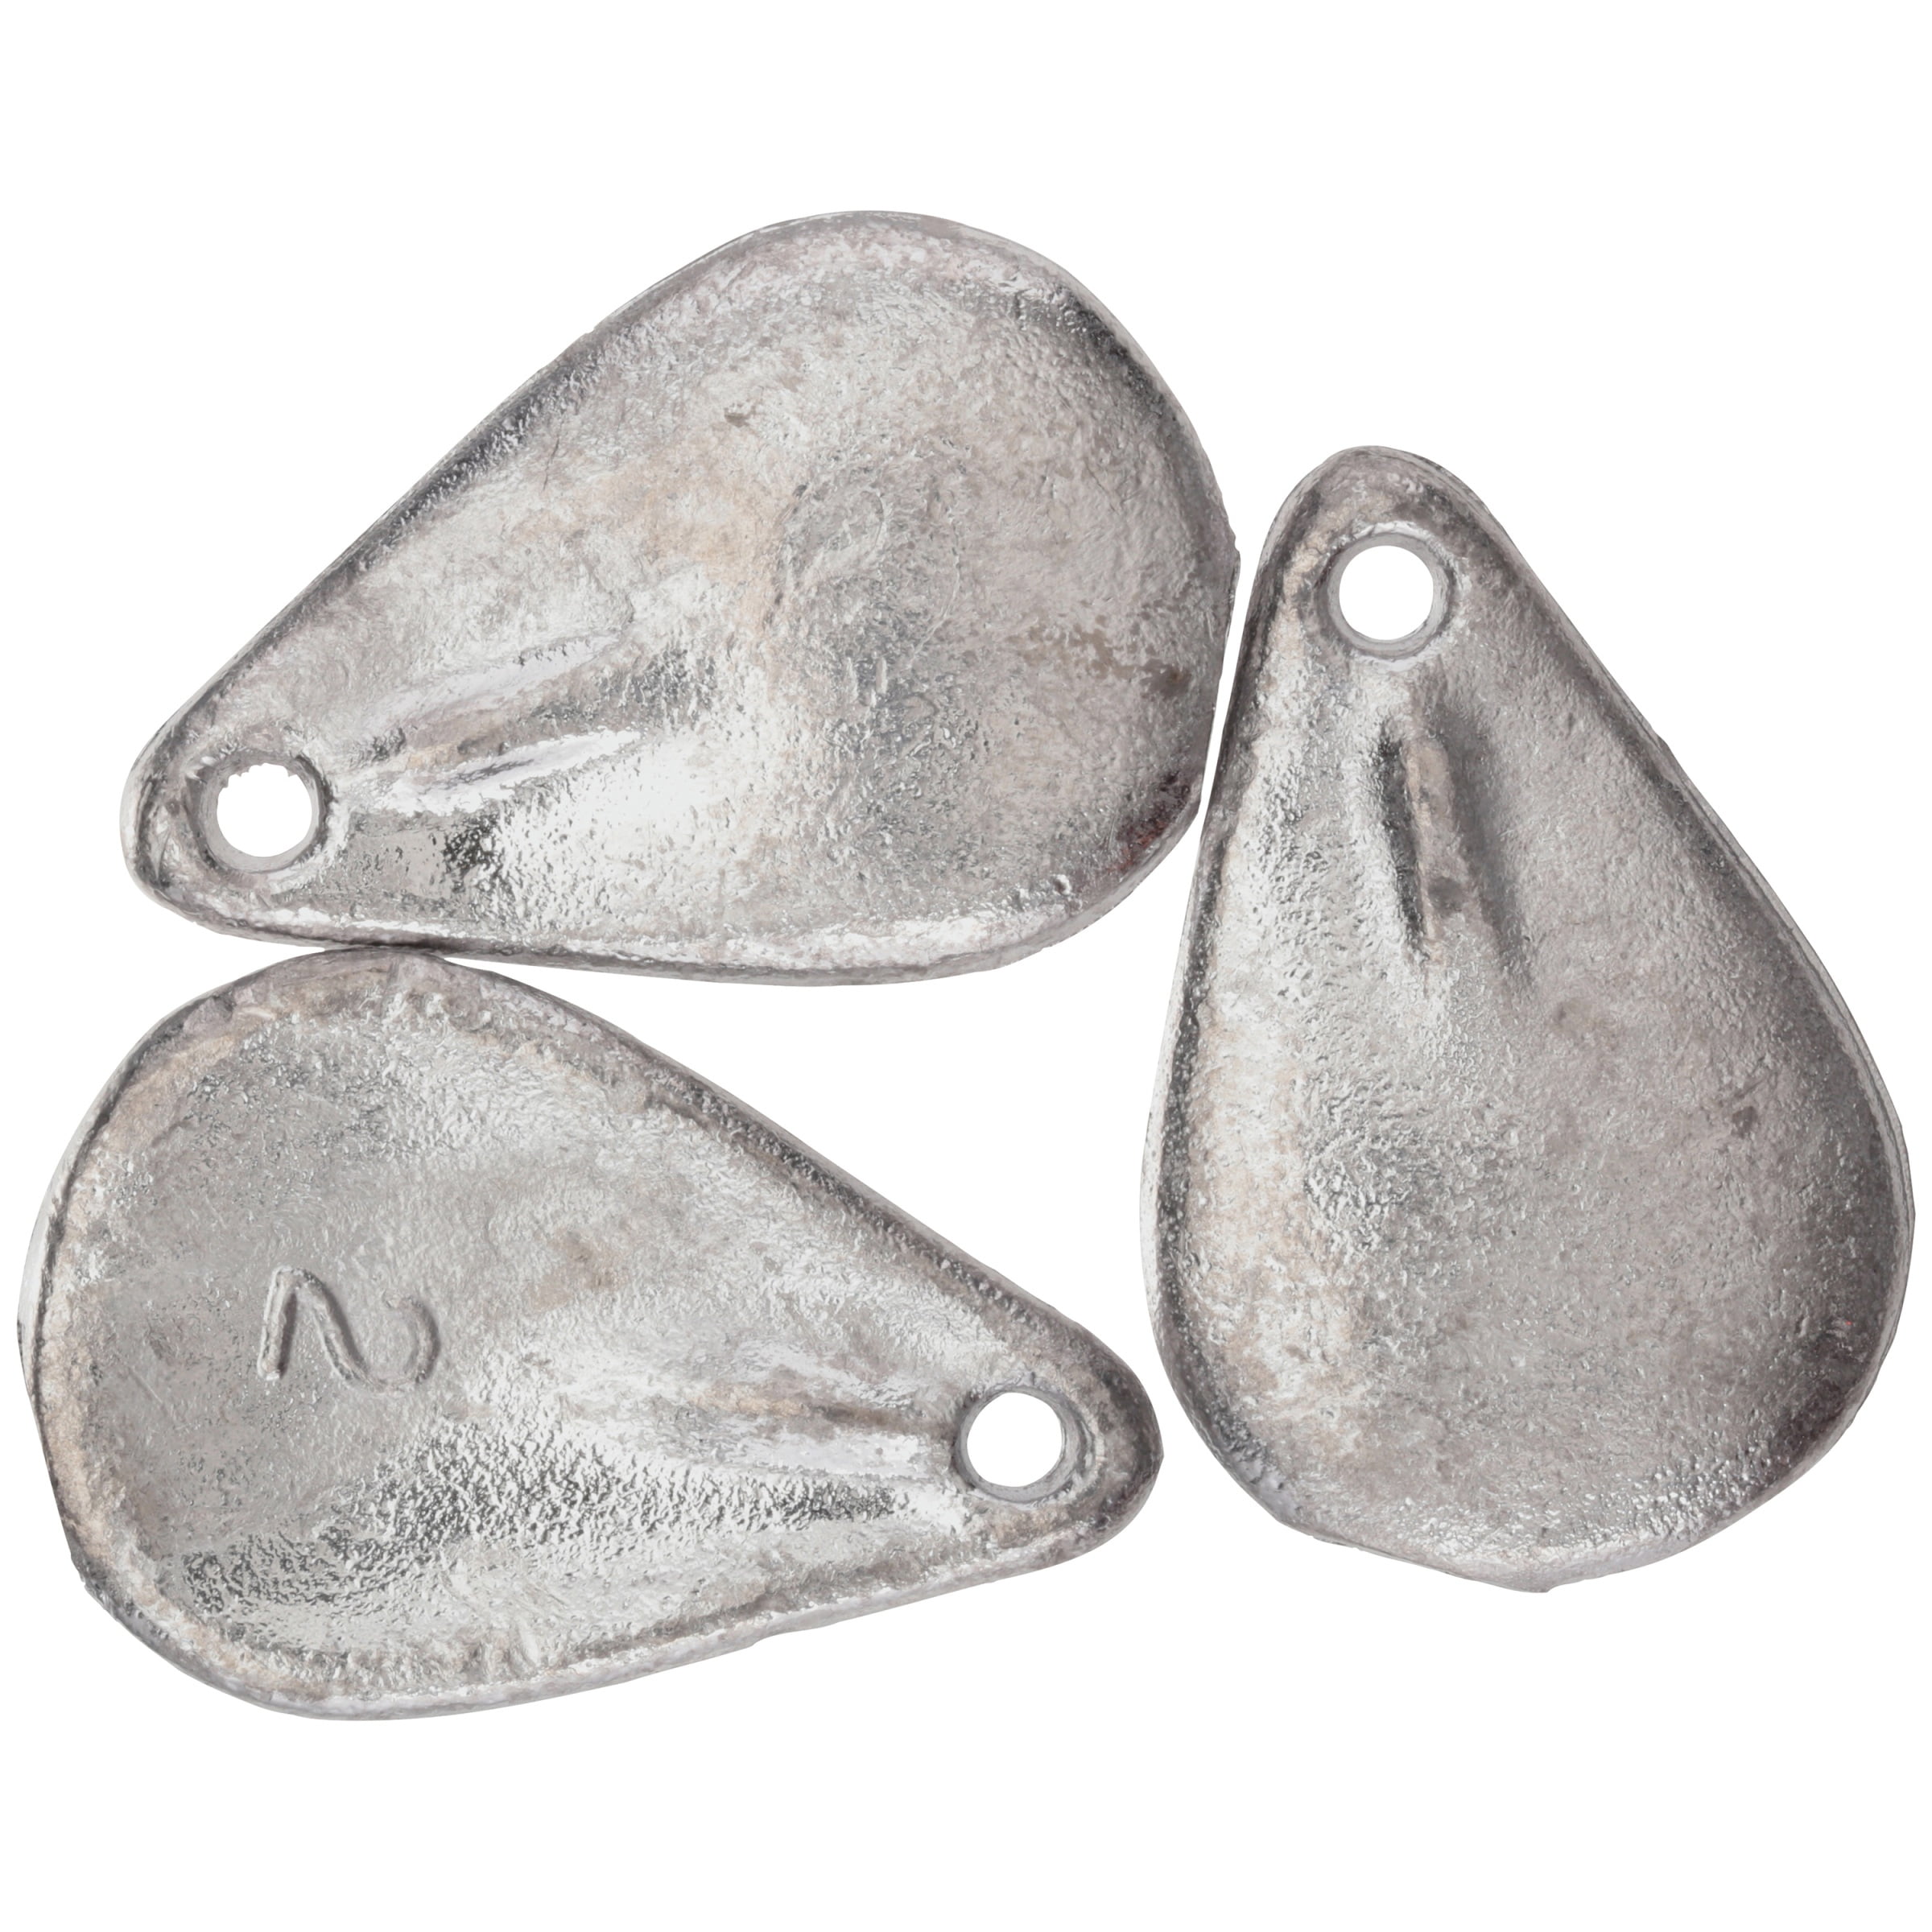 Multi Pack of 4 Silver, Bullet Weights WPY3-24 Pyramid Fishing Sinker One Size 3-Ounce